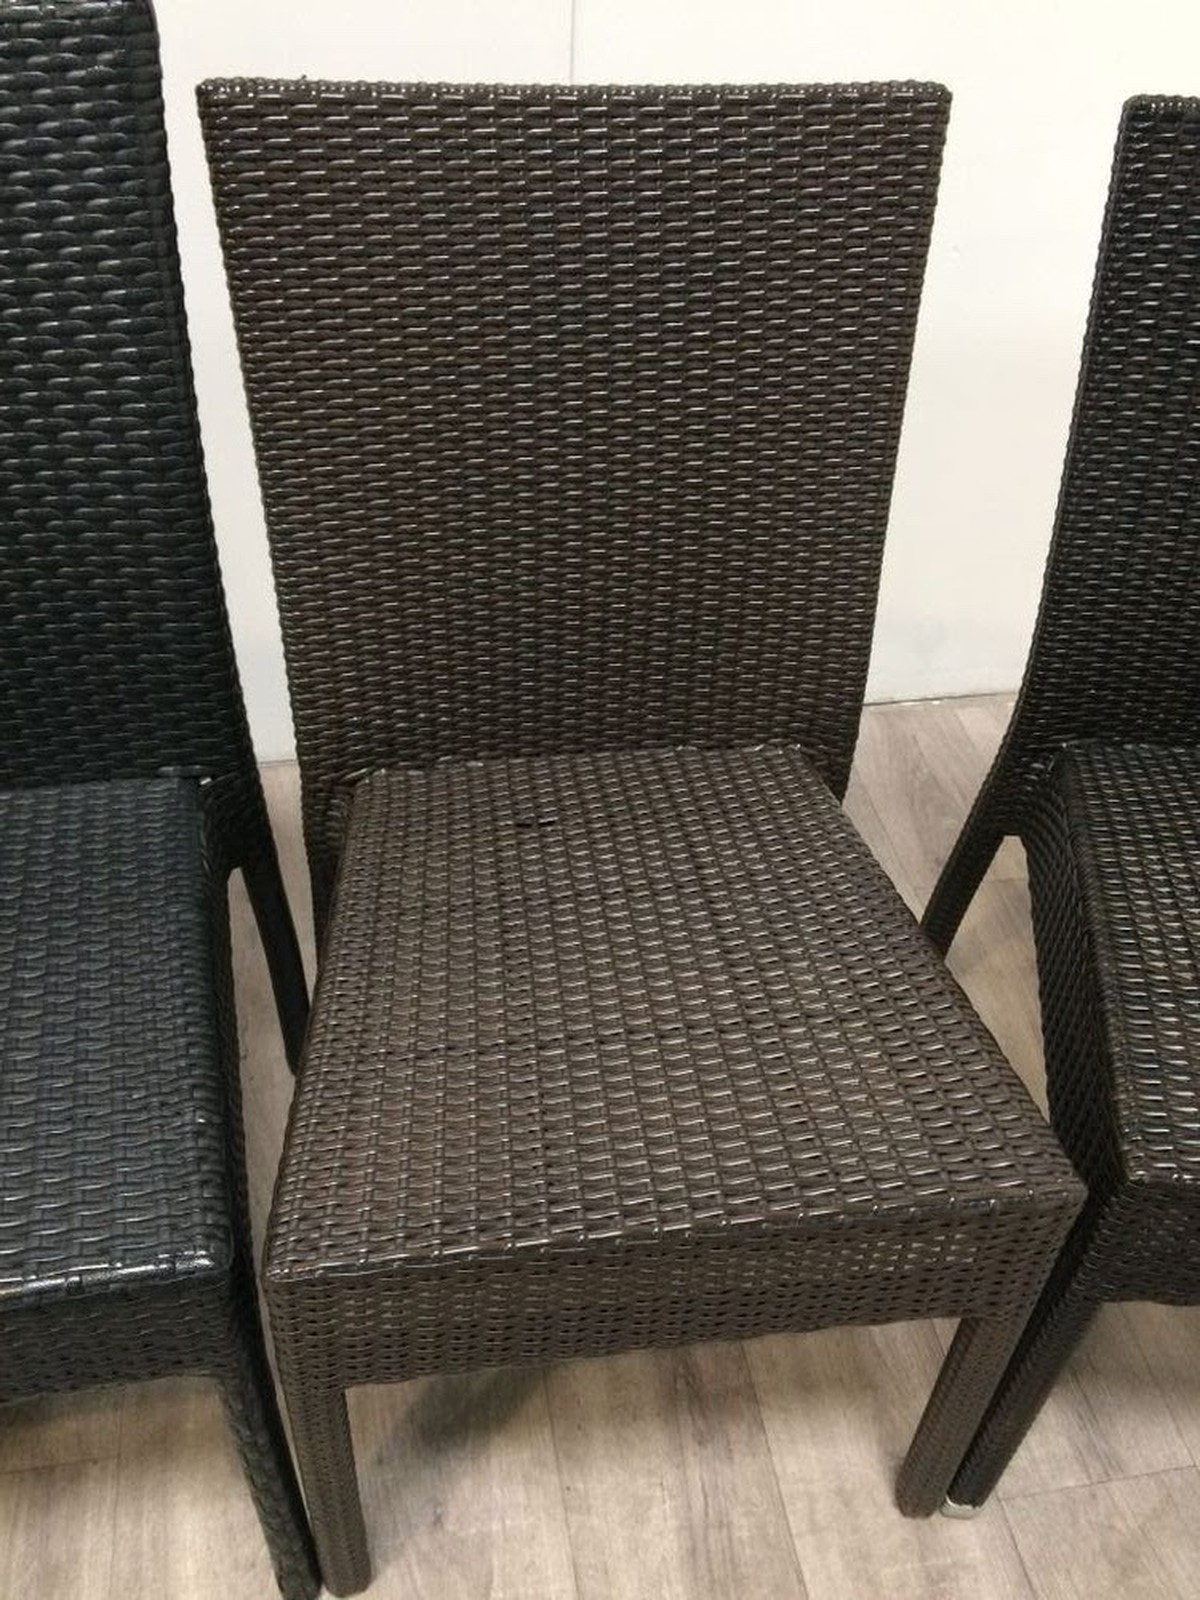 Secondhand Chairs and Tables | Restaurant Chairs | Job Lot Of 19 Mixed